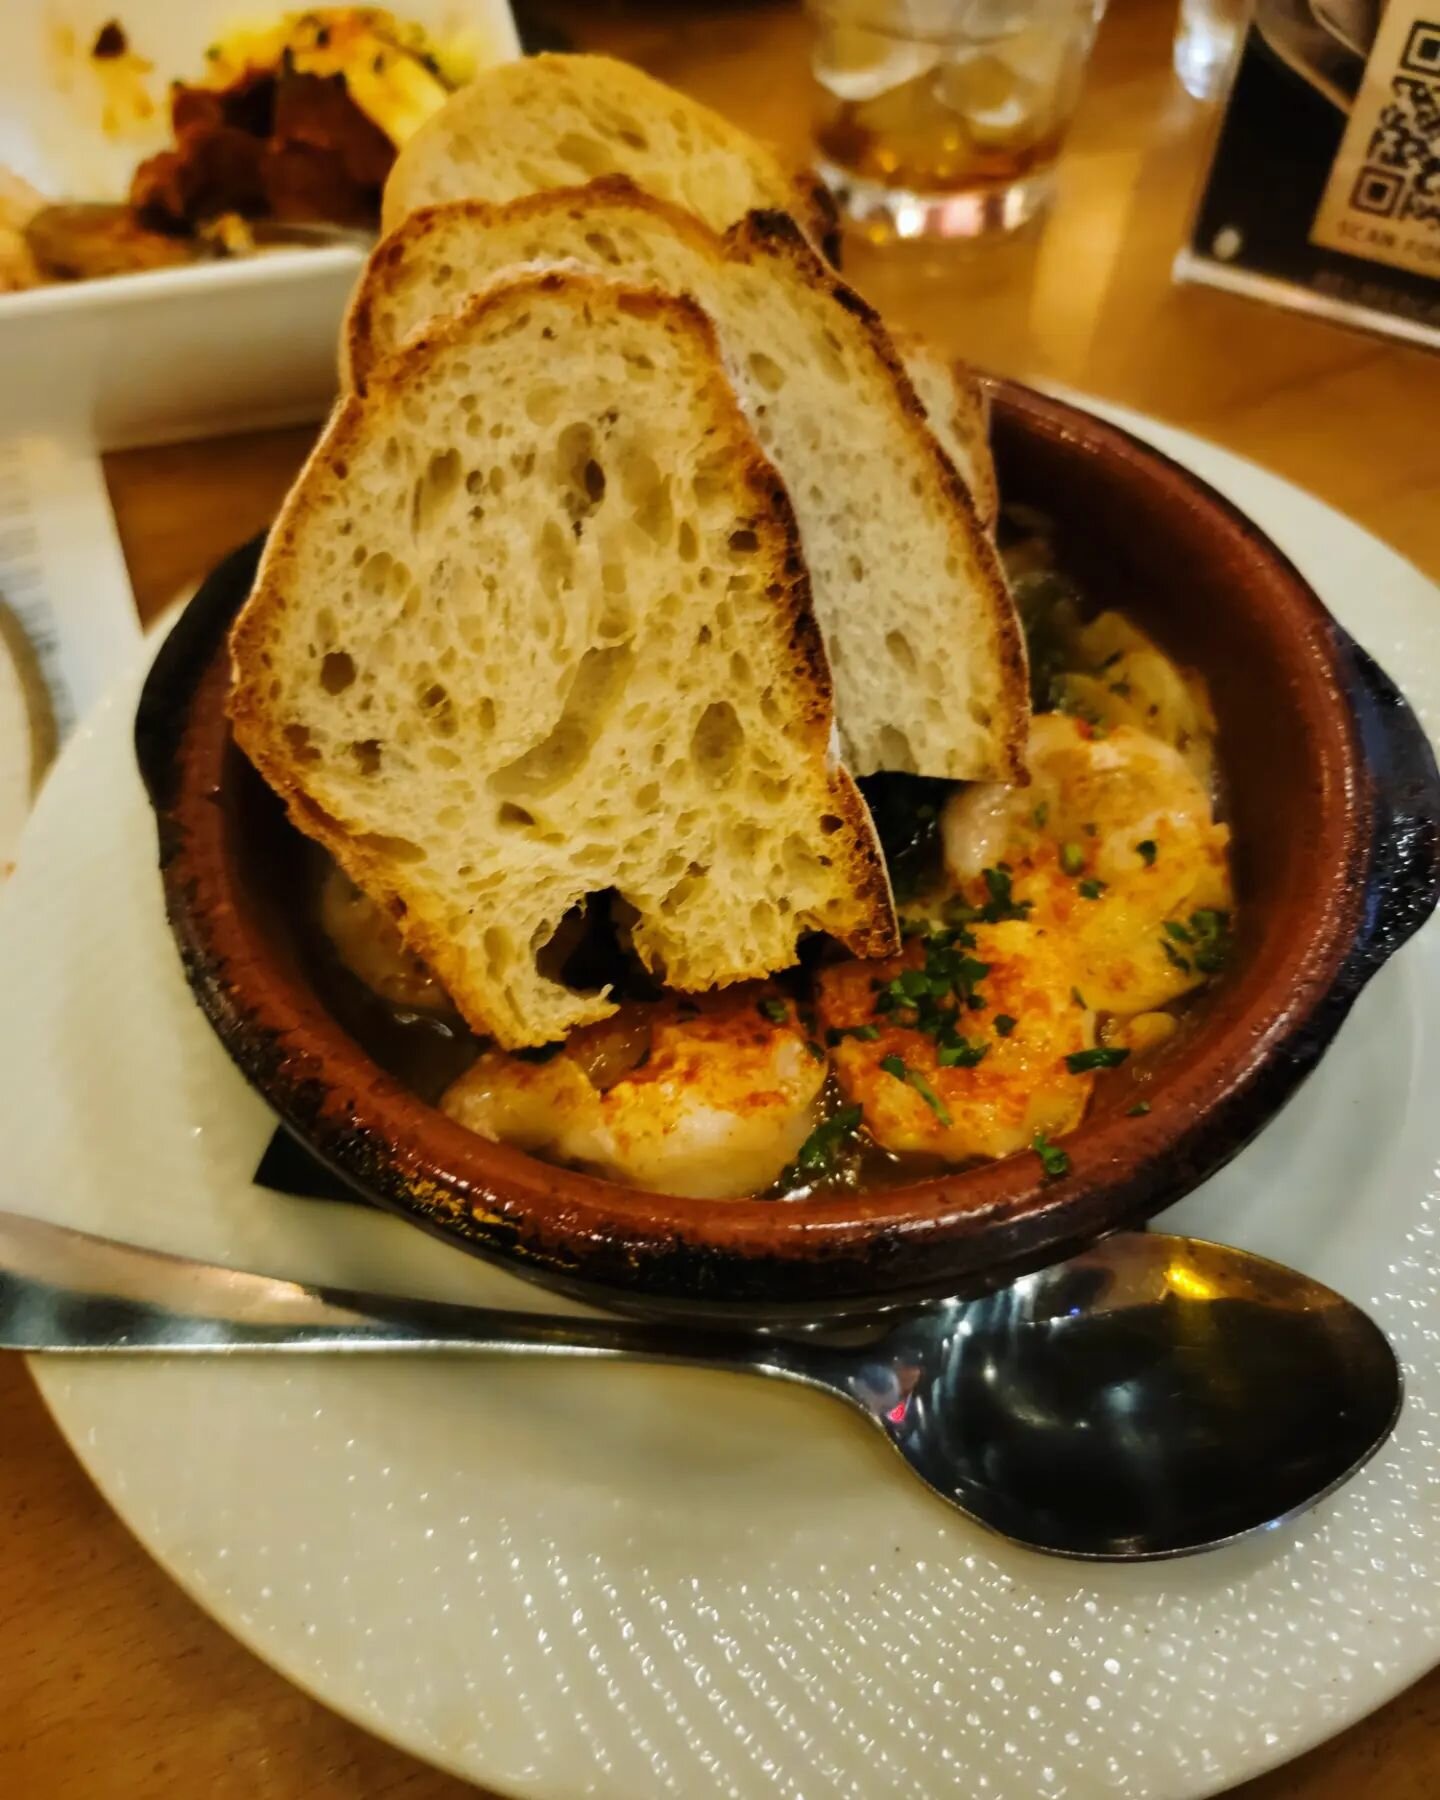 Did someone say tapas?!?

I absolutely love tapas, and on Saturday I had easily the best ones I've tasted outside of Spain. Where, you may ask? Rockville, Maryland! 

I know I know, you may have never heard of Rockville before. It's located in Montgo